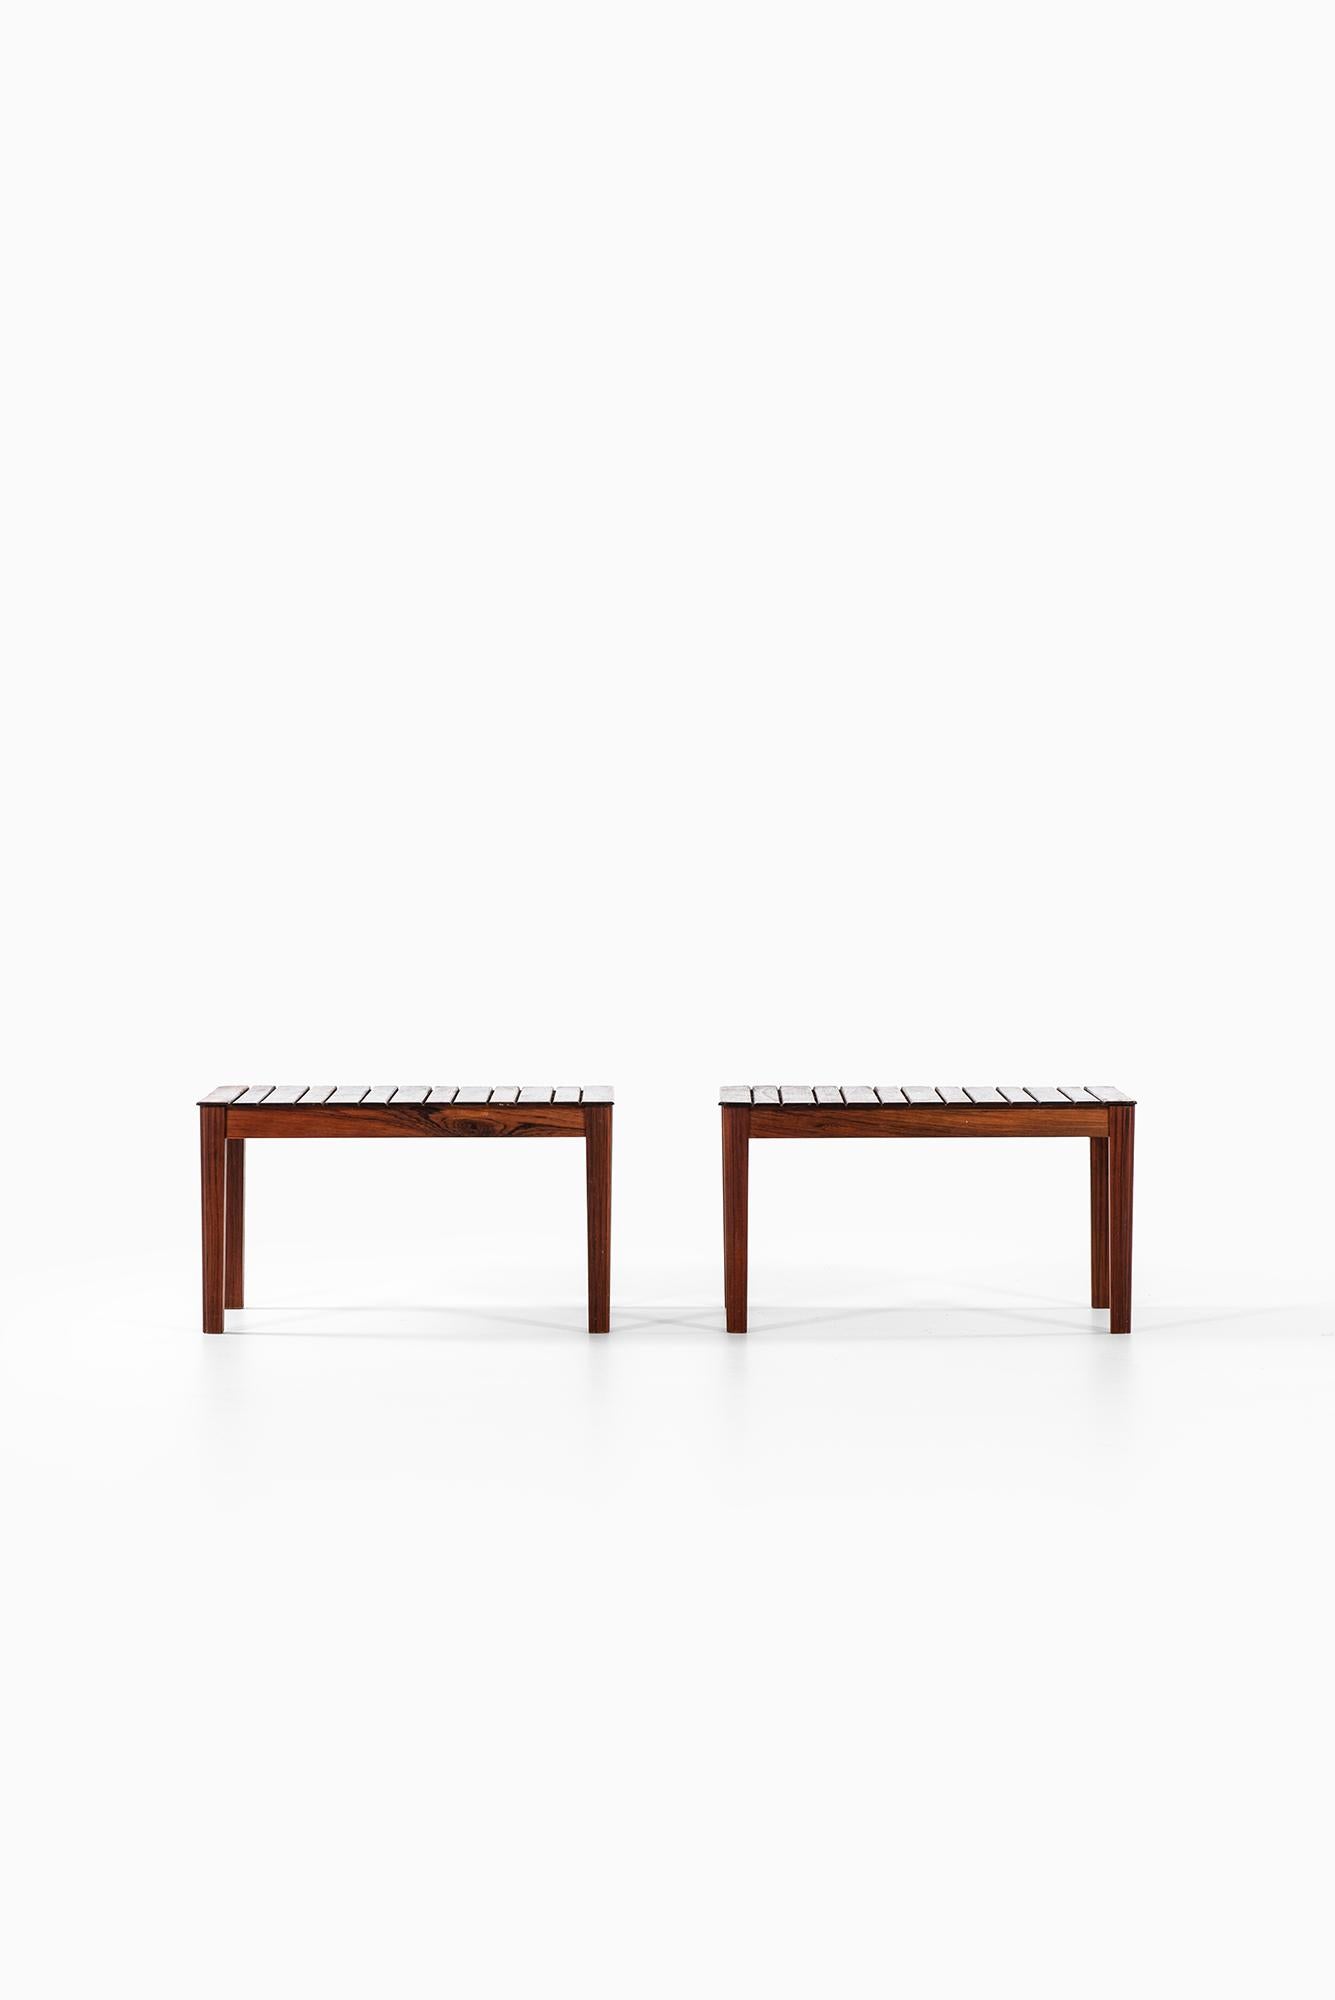 Scandinavian Modern Pair of Side Tables or Benches in Solid Rosewood by Alberts in Sweden For Sale